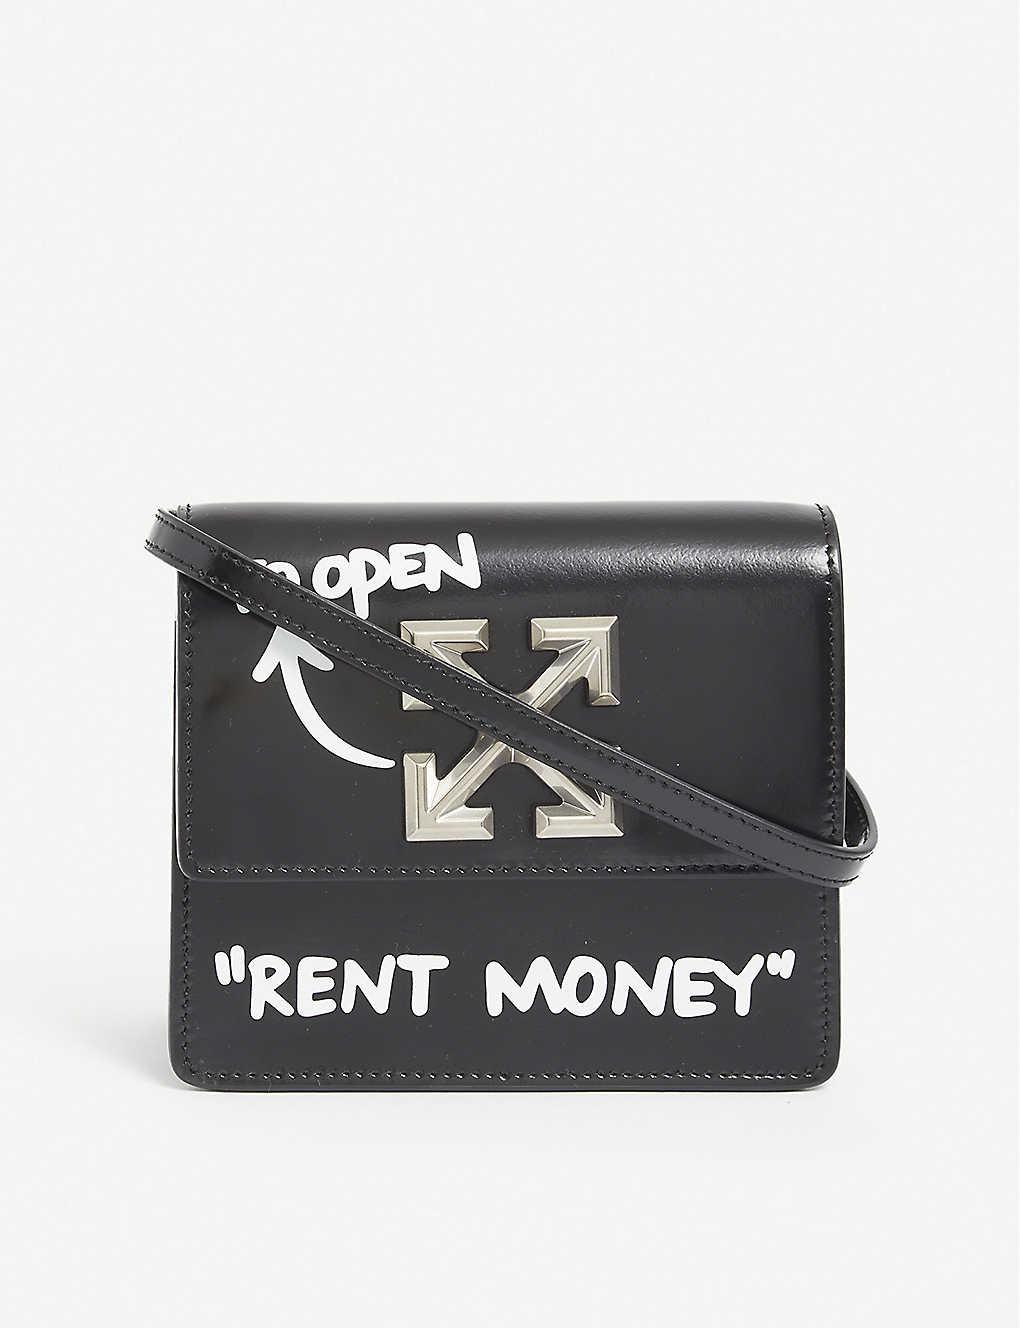 OFF-WHITE 0.7 Jitney Bag RENT MONEY Black/White in Leather with  Silver-tone - US